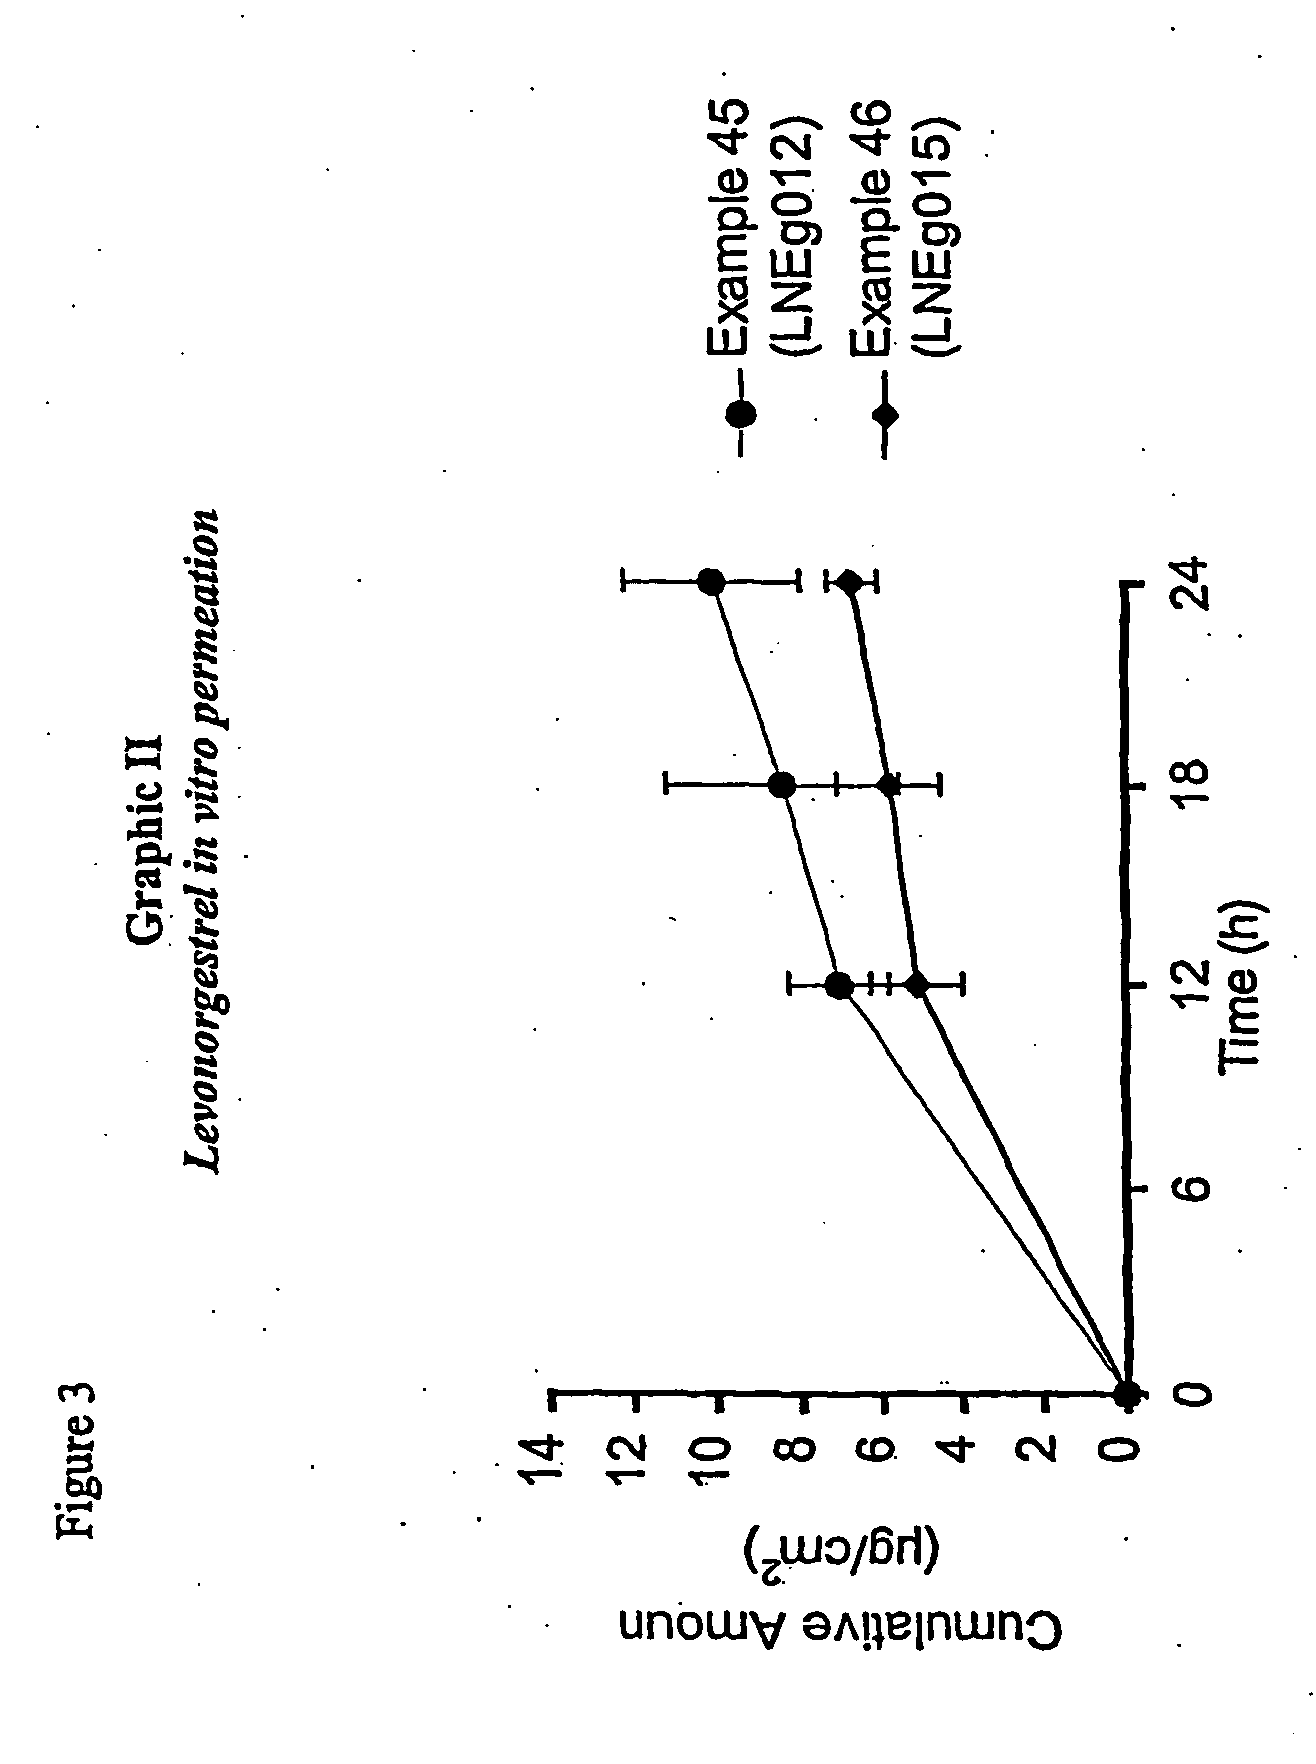 Novel composition for transdermal and/or transmucosal administration of active compounds that ensures adequate therapeutic levels